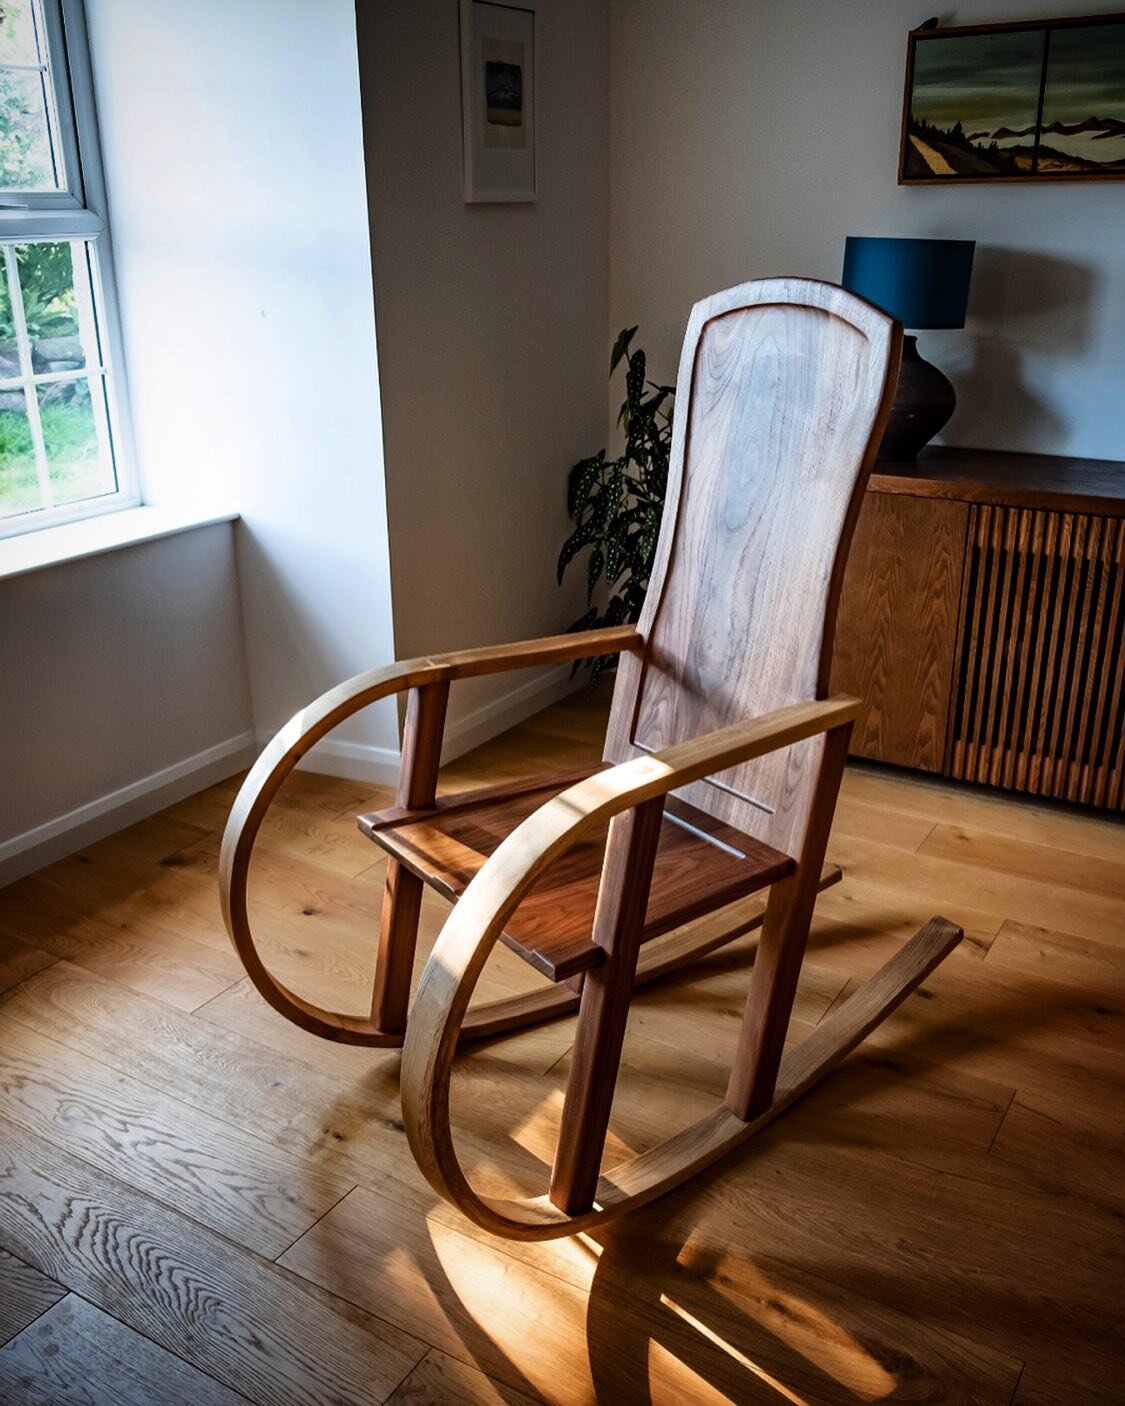 We delivered this bespoke walnut and ash rocking chair to its new home today. With an American Walnut back and seat, hand shaped for comfort, and local Scottish Ash steam bent rockers, this one of a kind chair is meant to hold generations and create 